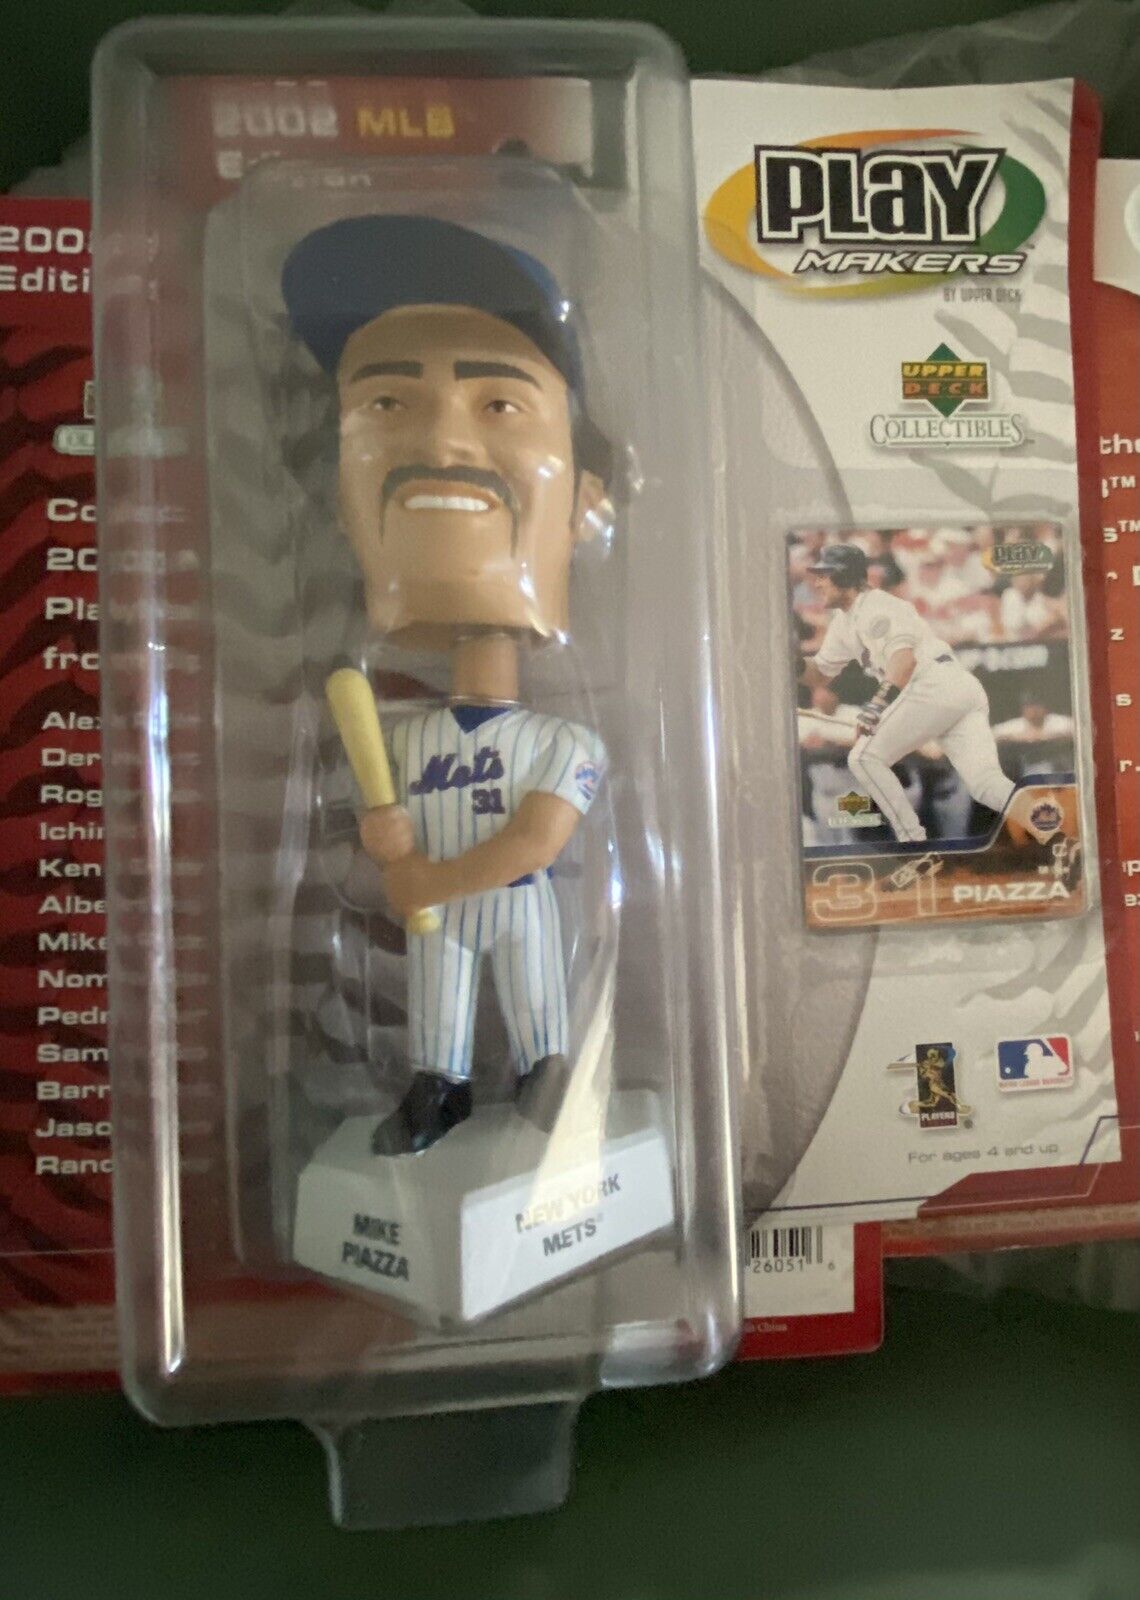 New Sealed 2002 MLB Edition Play Makers Upper Deck Mike Piazza Figurine(Read Des